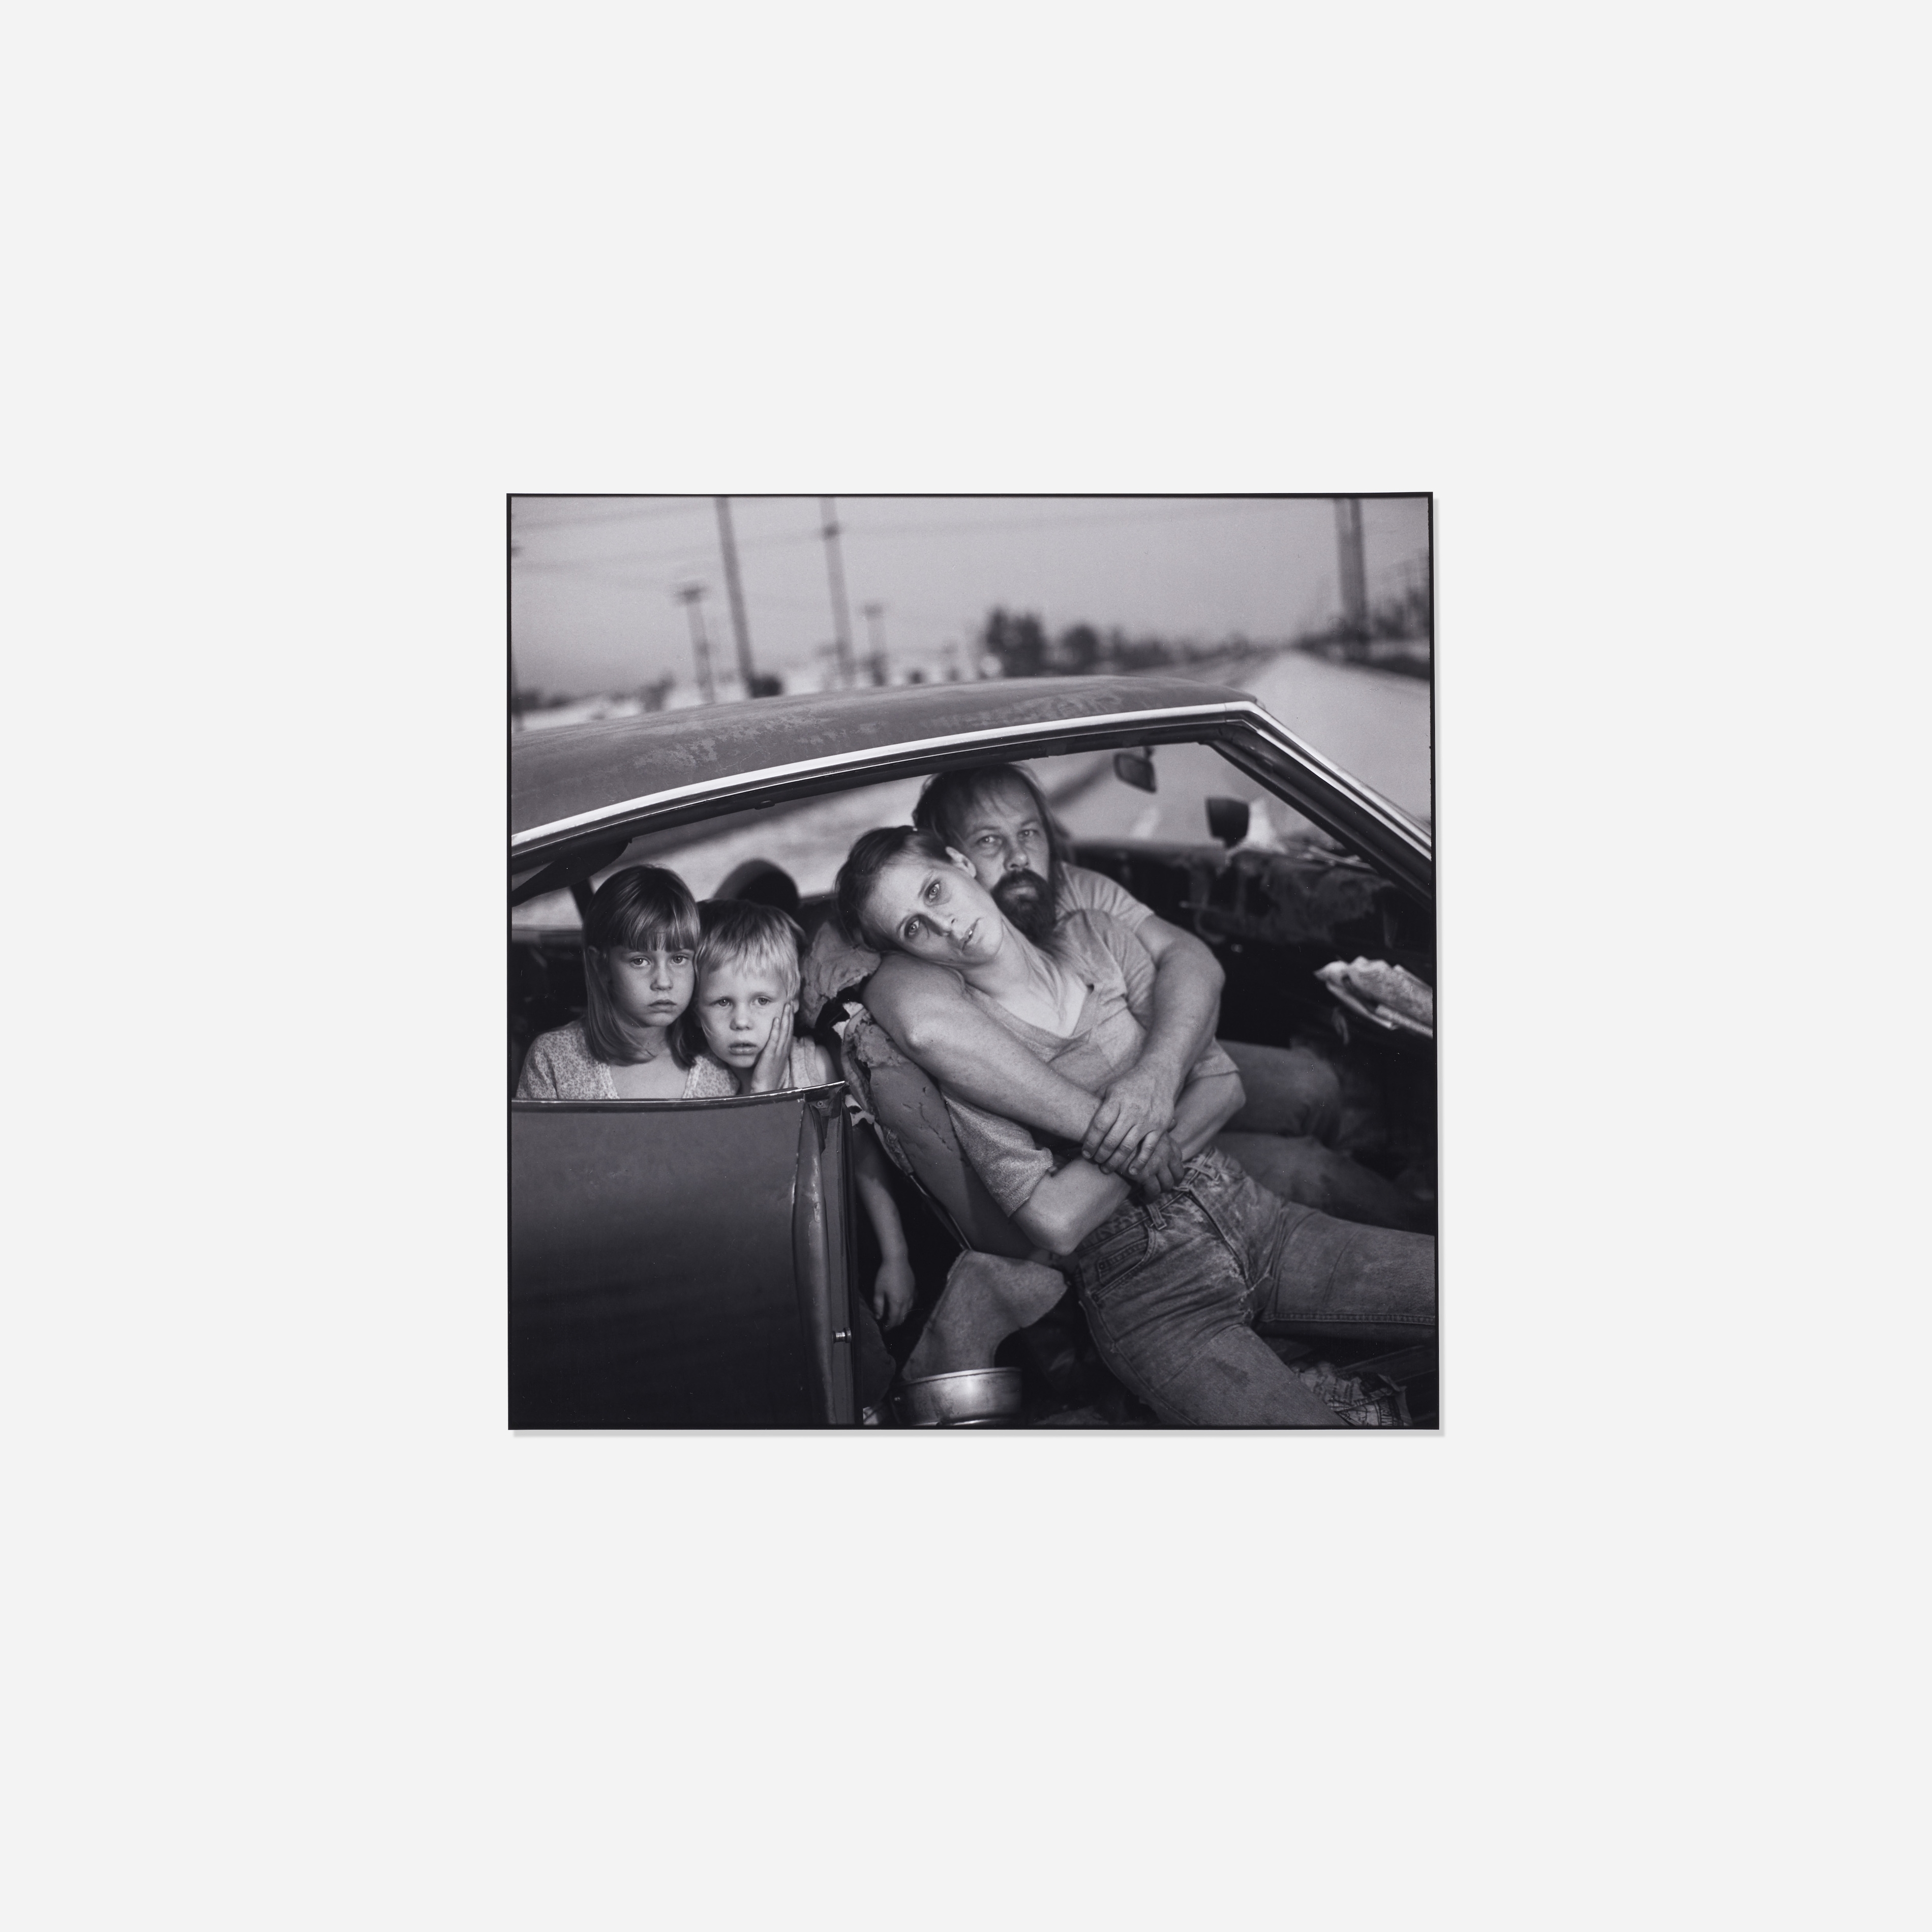 The Damm Family in their Car by Mary Ellen Mark, 1987 / 1992